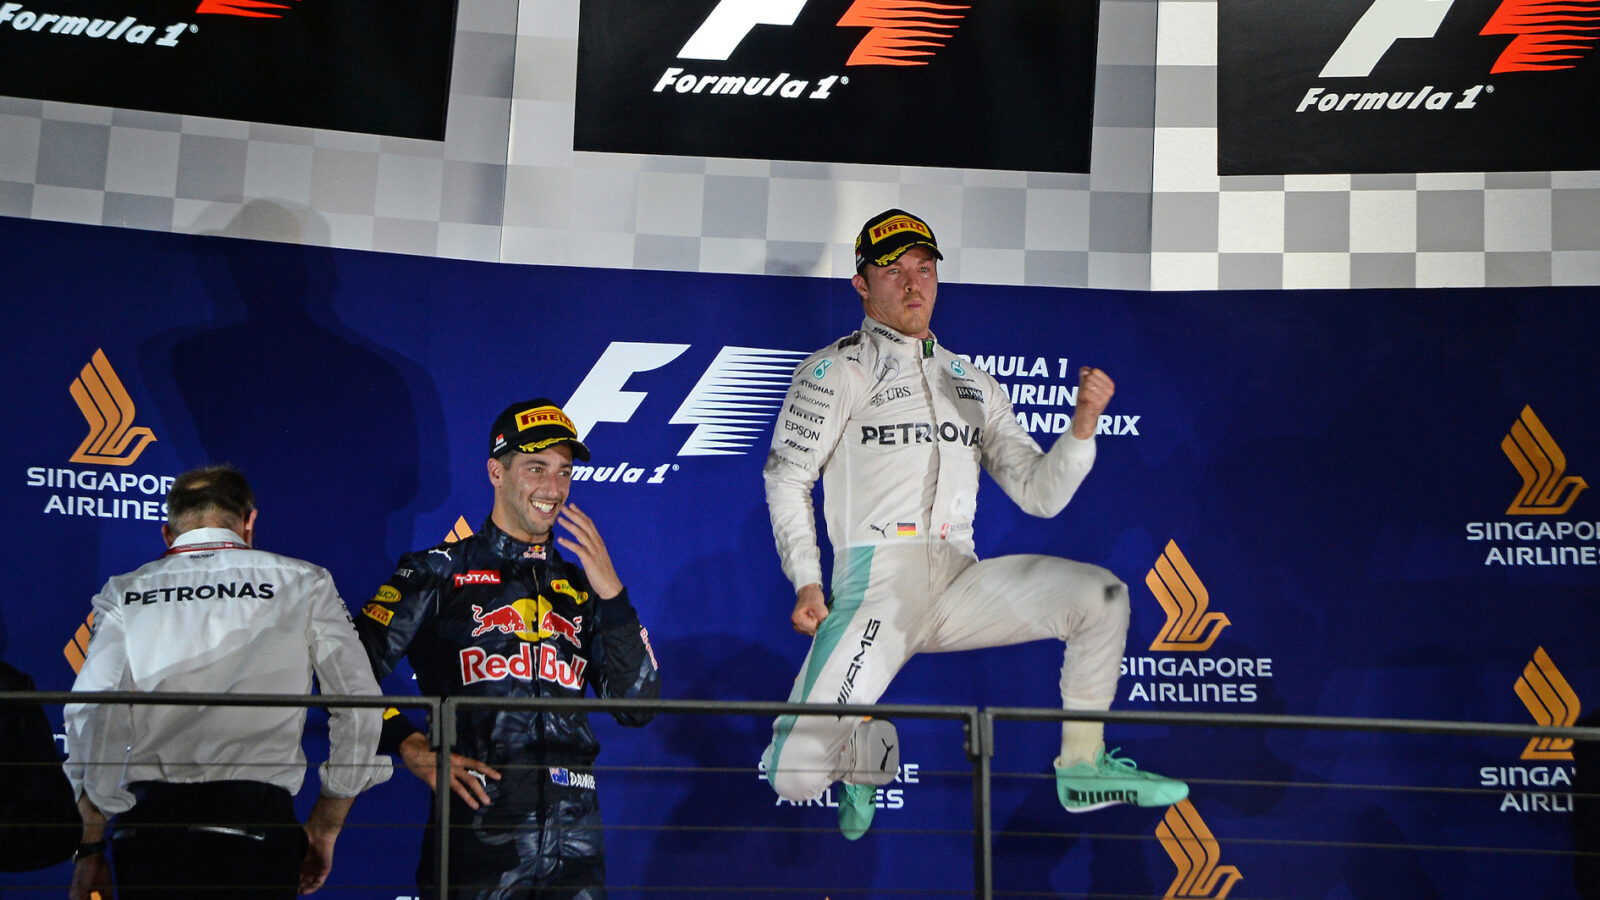 Nico Rosberg jumps up on the podium after winning the 2016 Singapore Grand Prix